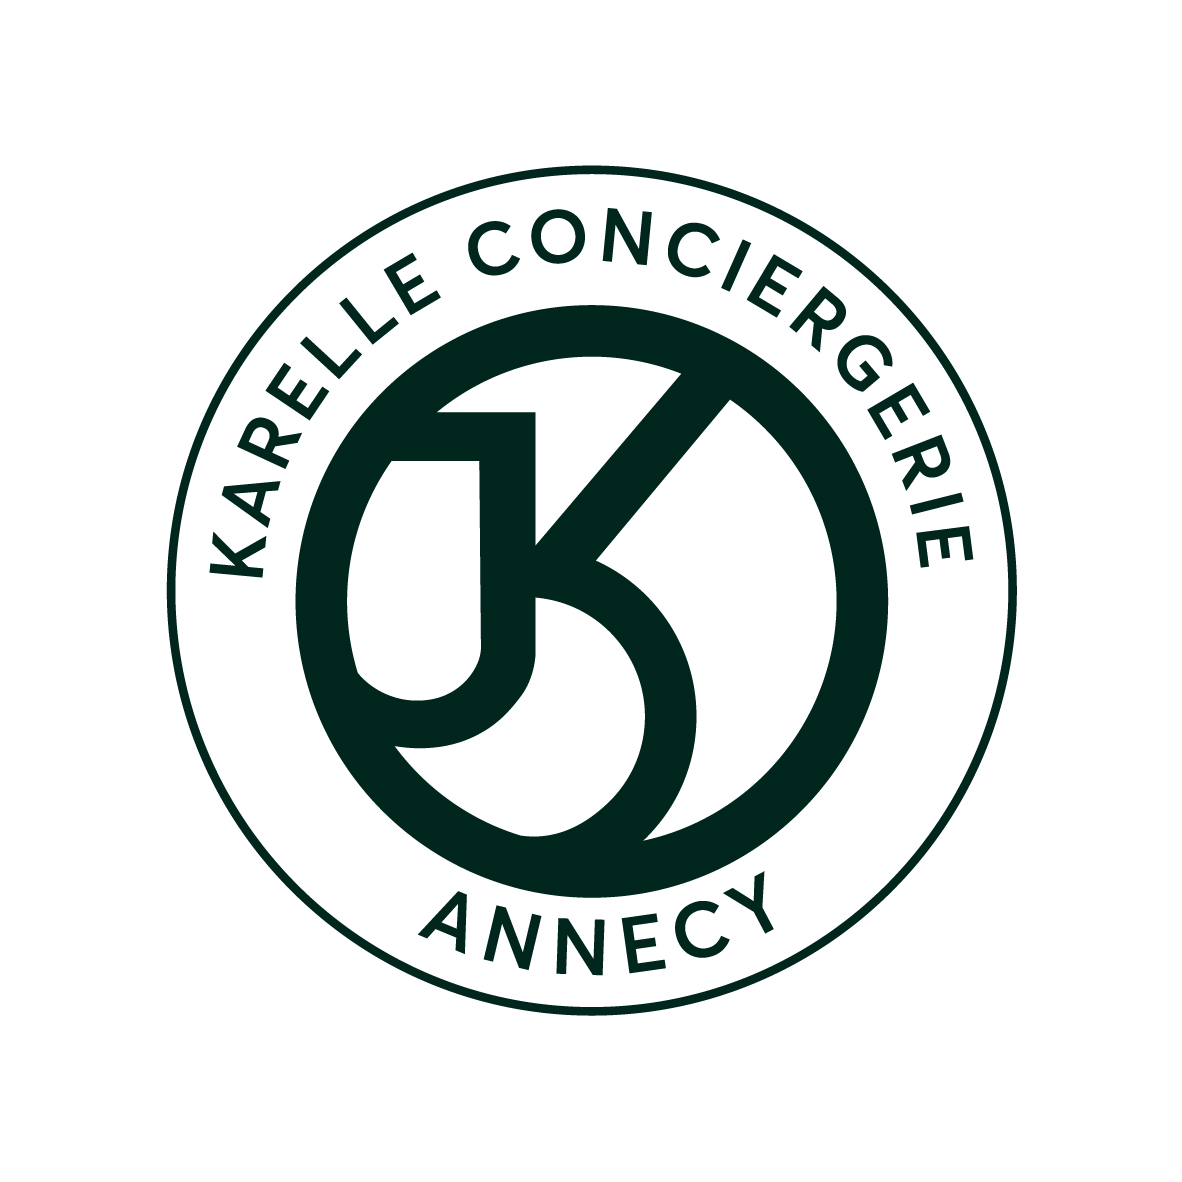 Karelle symbol with text